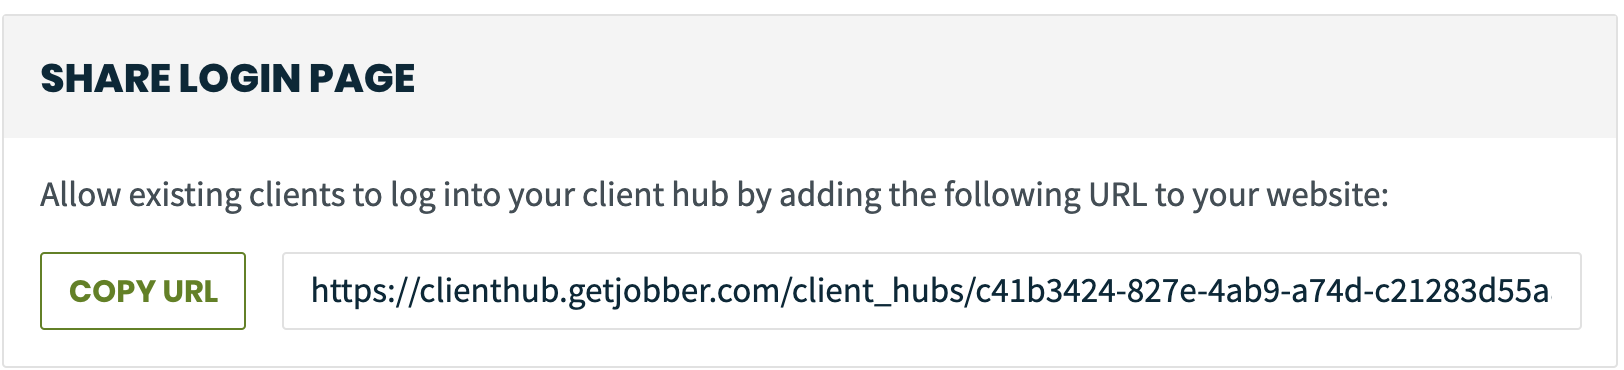 share login page section from settings. There is a button to copy the client hub URL.